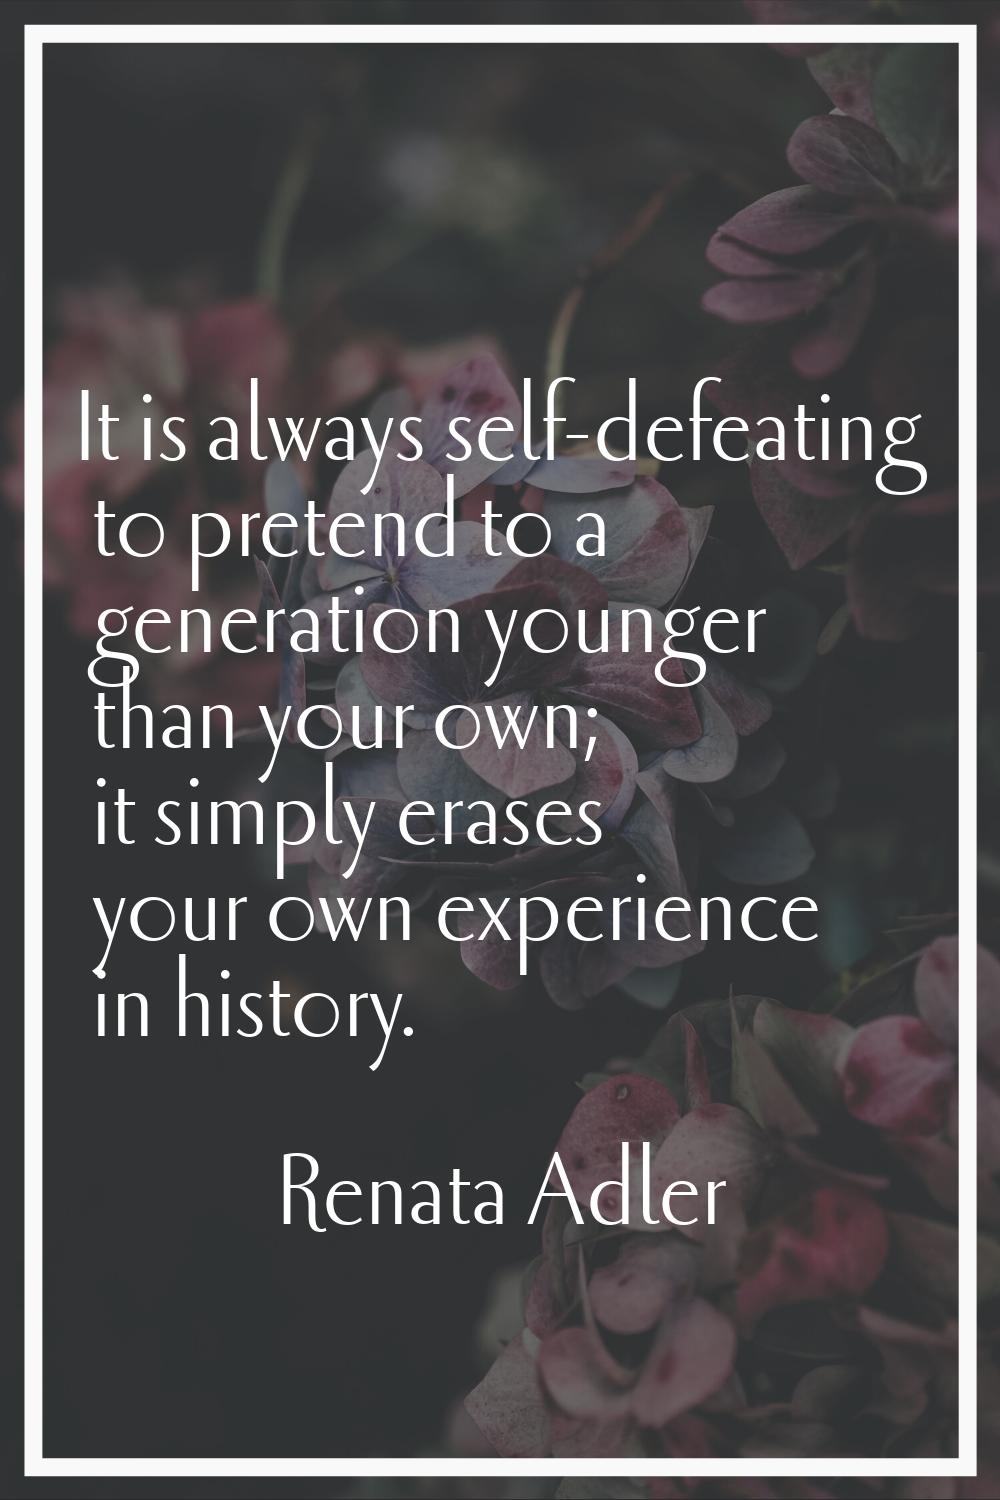 It is always self-defeating to pretend to a generation younger than your own; it simply erases your